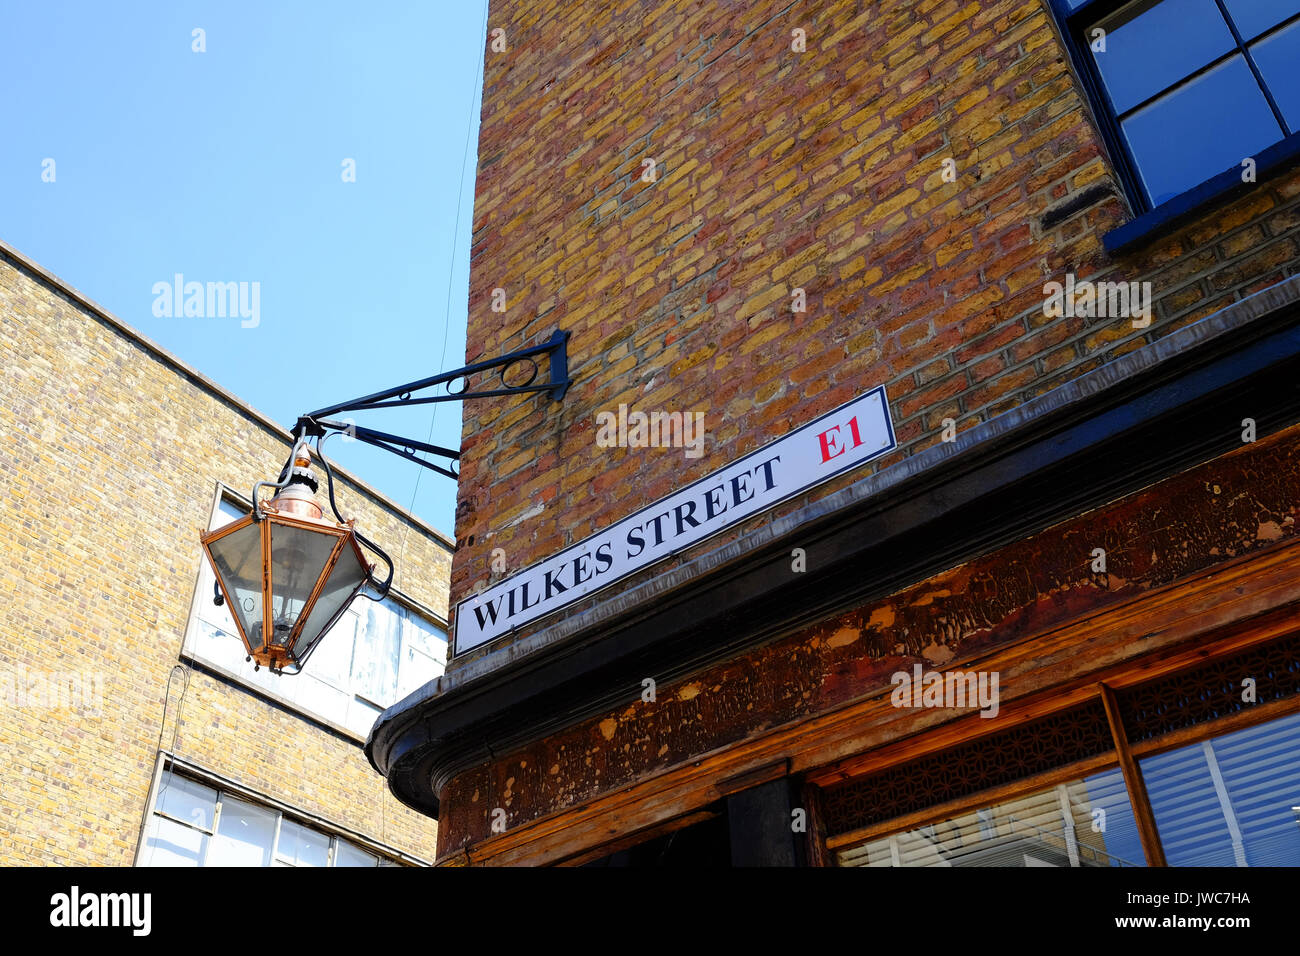 Street sign for Wilkes Street, near Brick Lane, in the East End of London Stock Photo